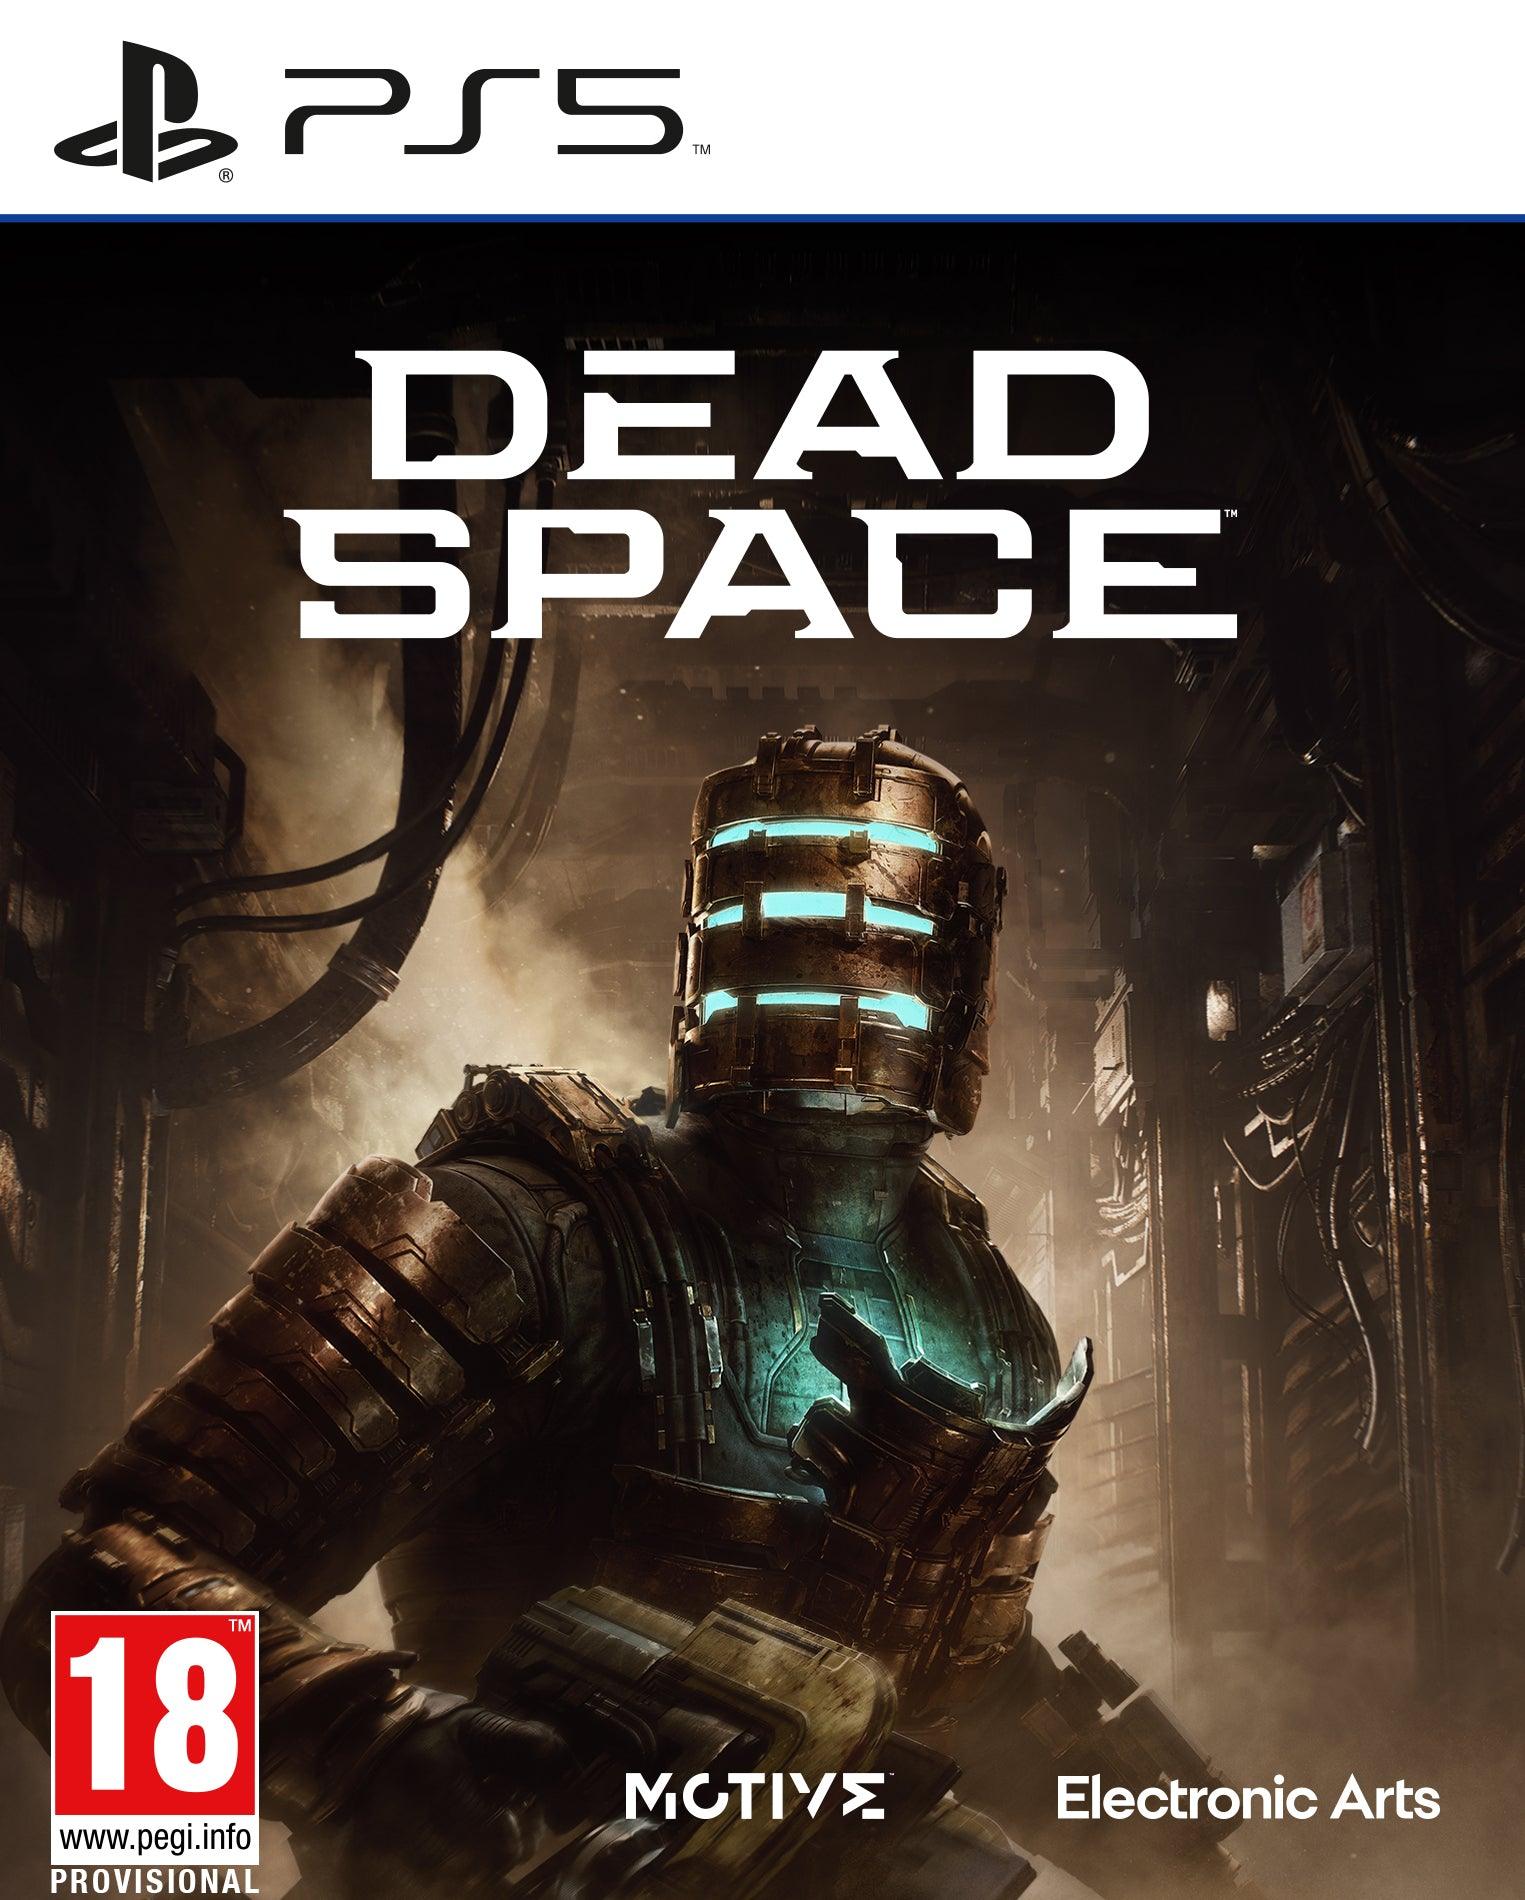 Dead Space - Want a New Gadget